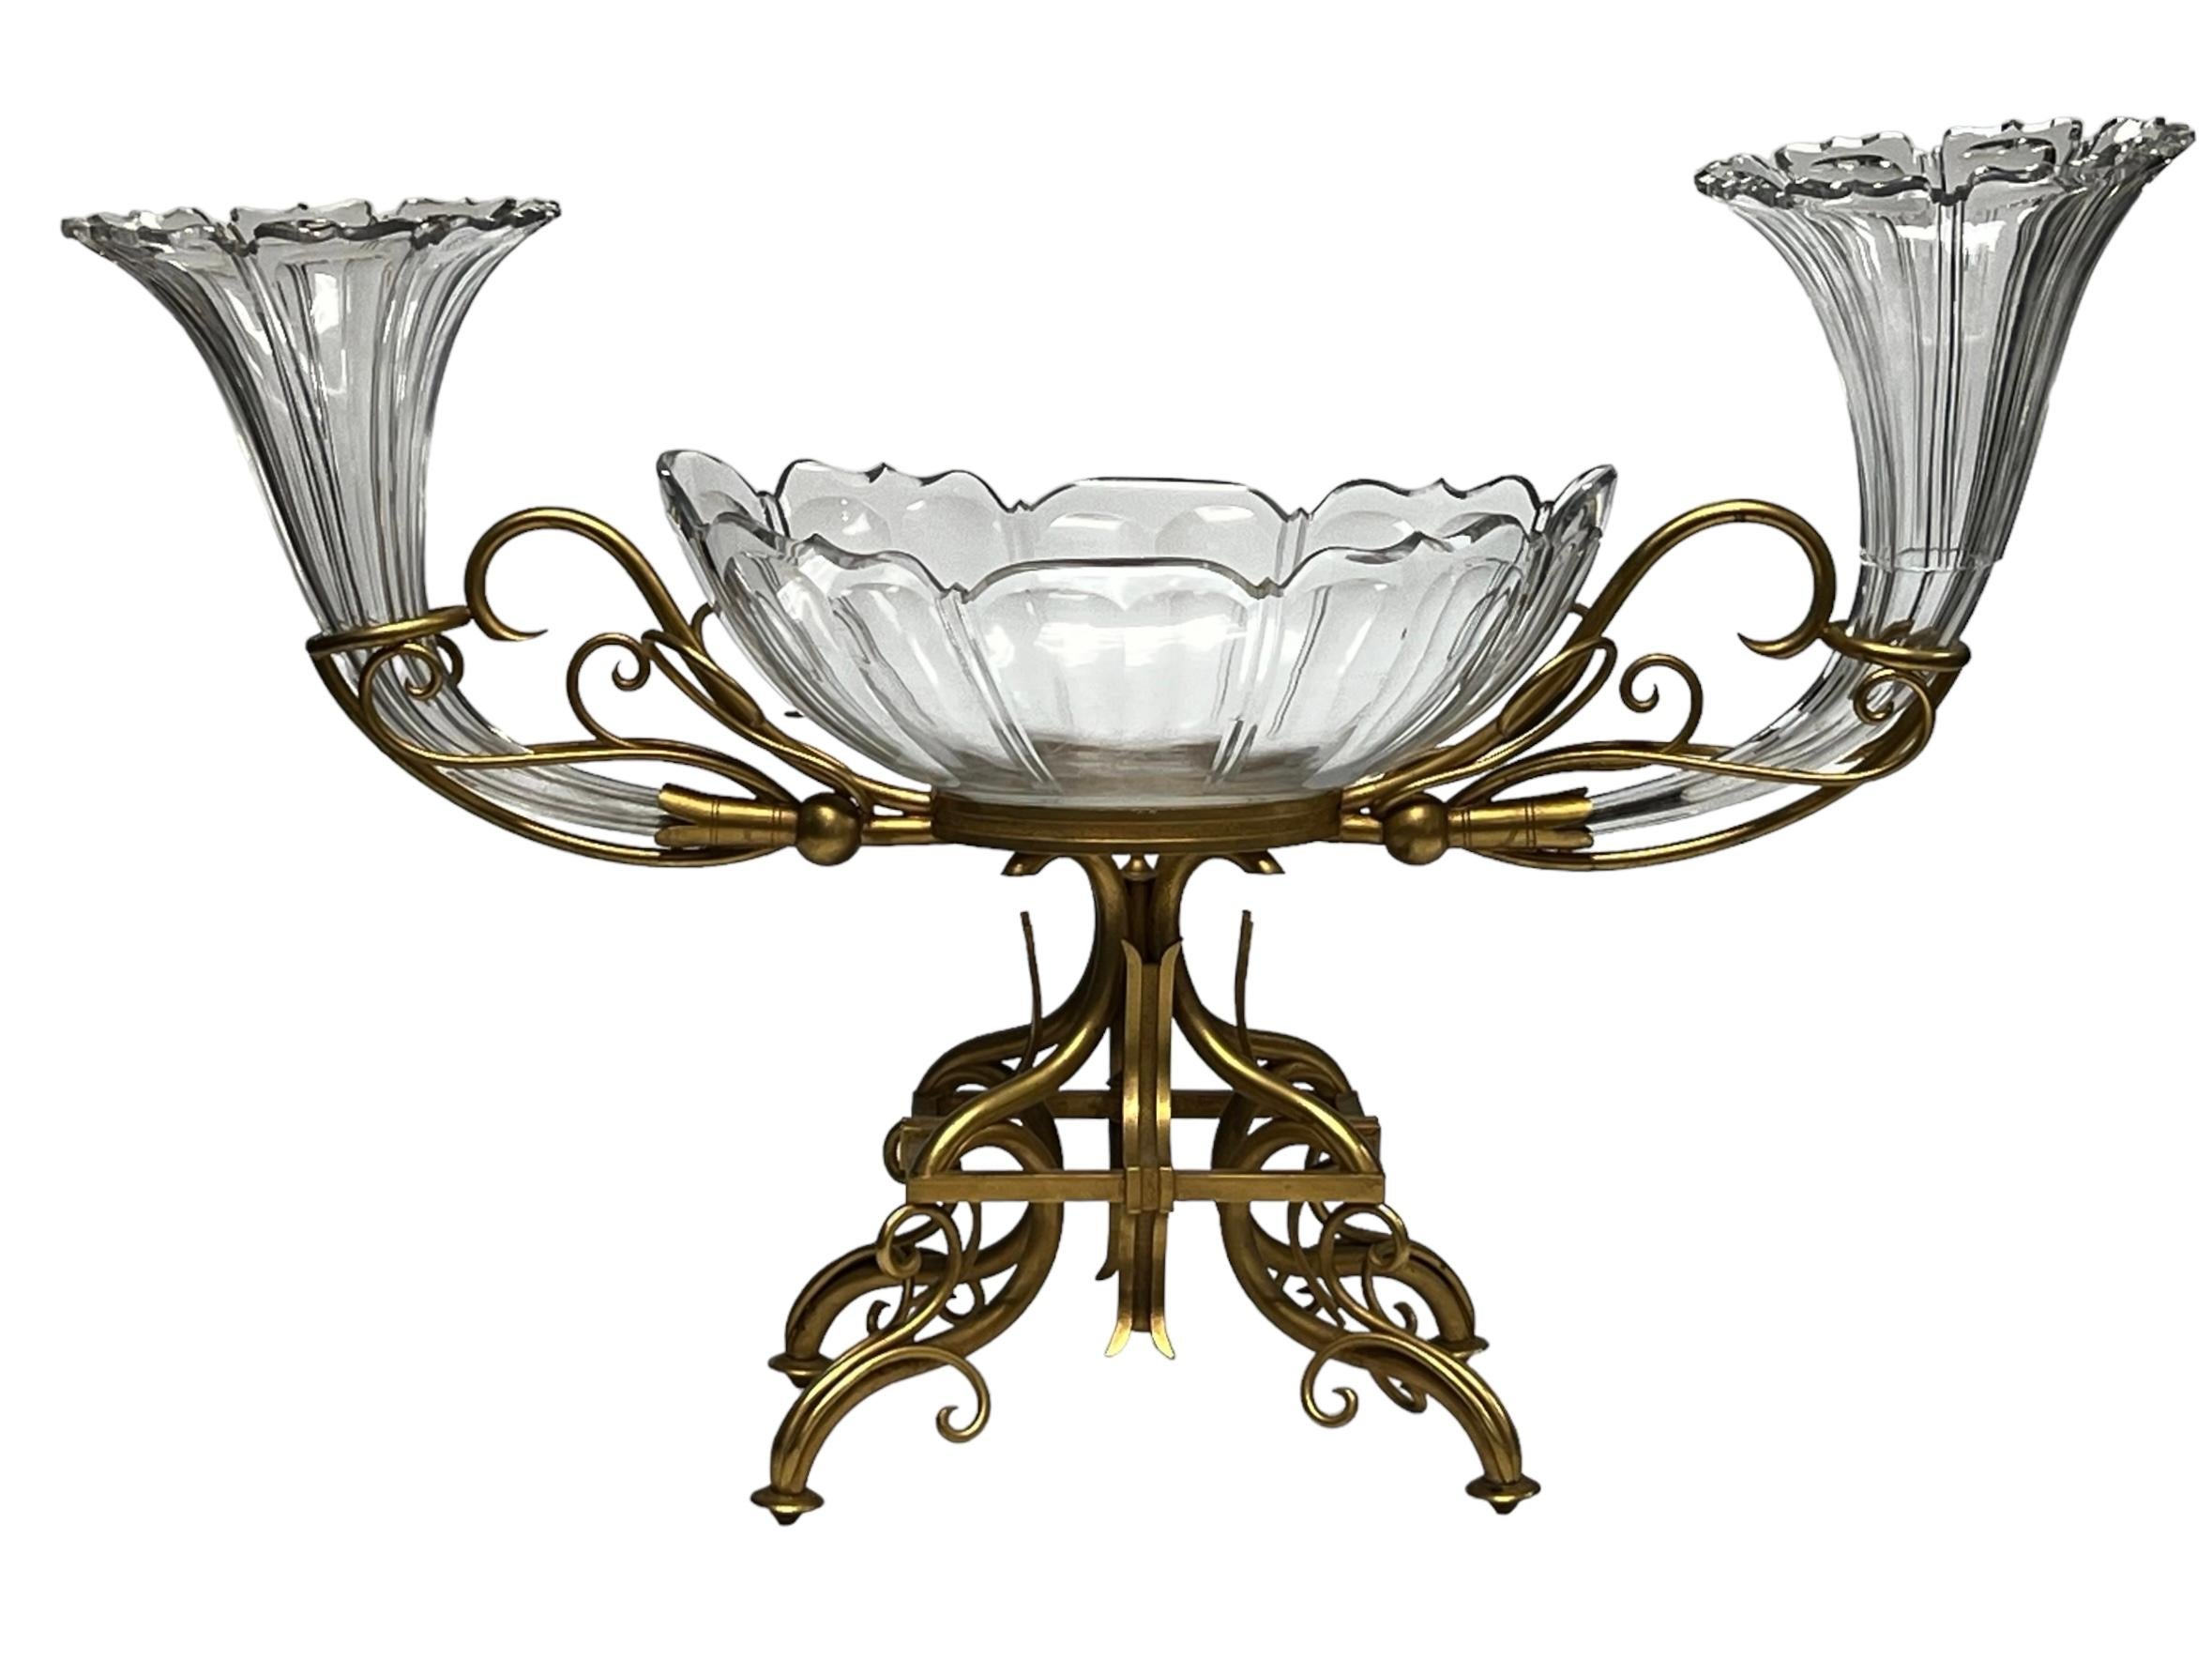 A very large and very fine quality bronze and crystal centerpiece consisting of a central bowl and a pair of vases on either sides.
Attributed to 